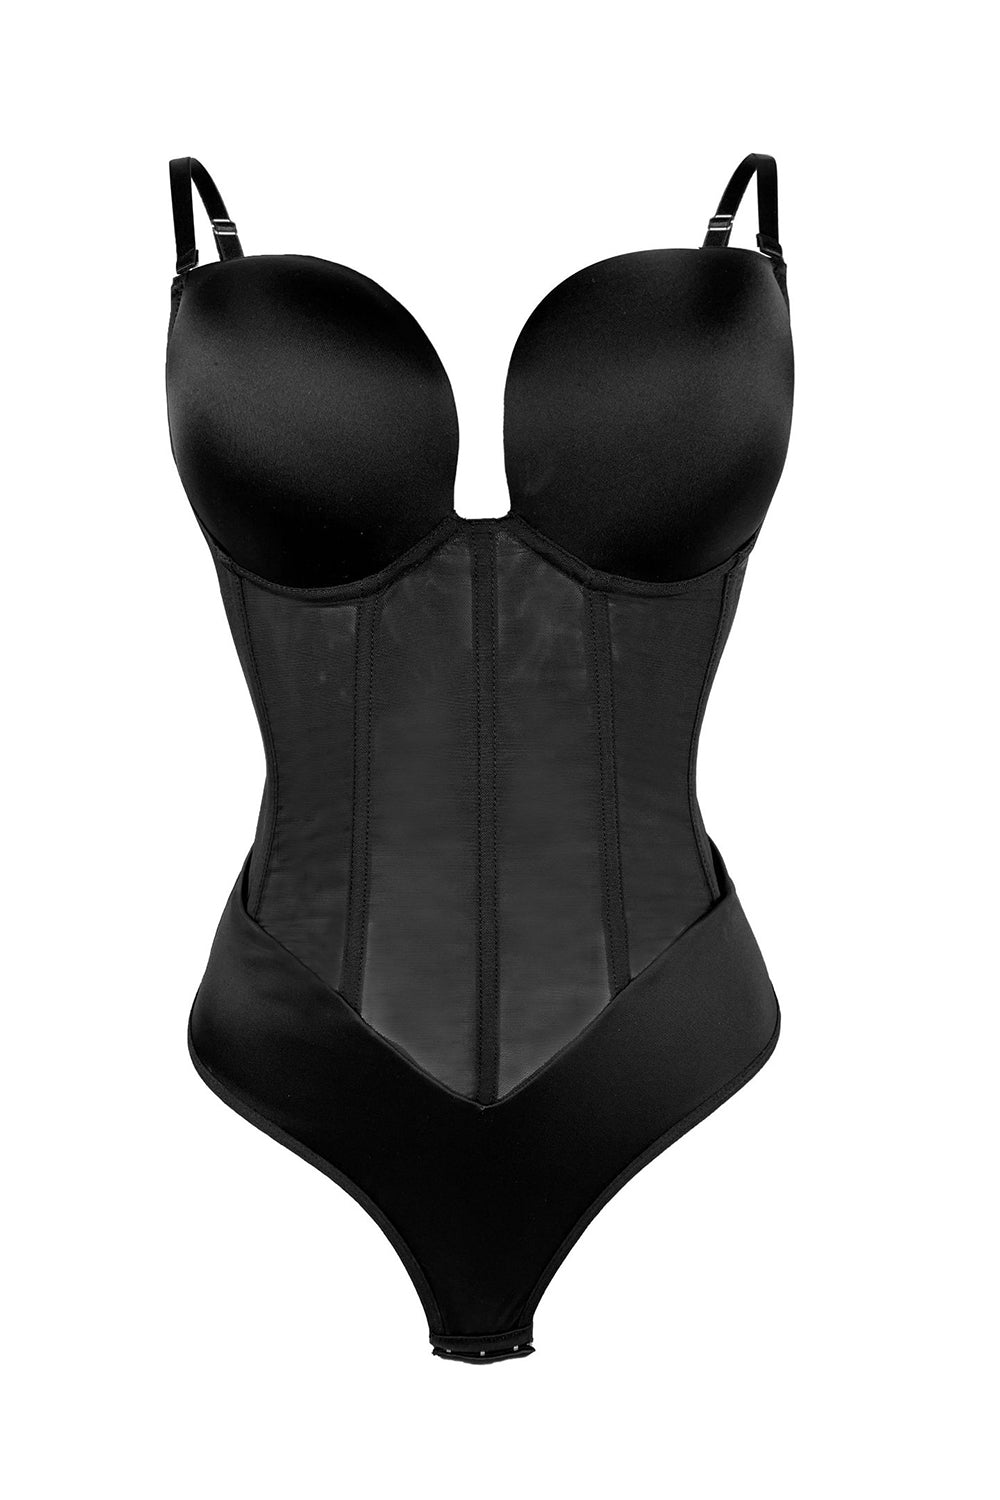 This everyday shapewear bodysuit holds in your core, shapes and lifts your  butt, and provides support for your chest. Its whisper-soft…